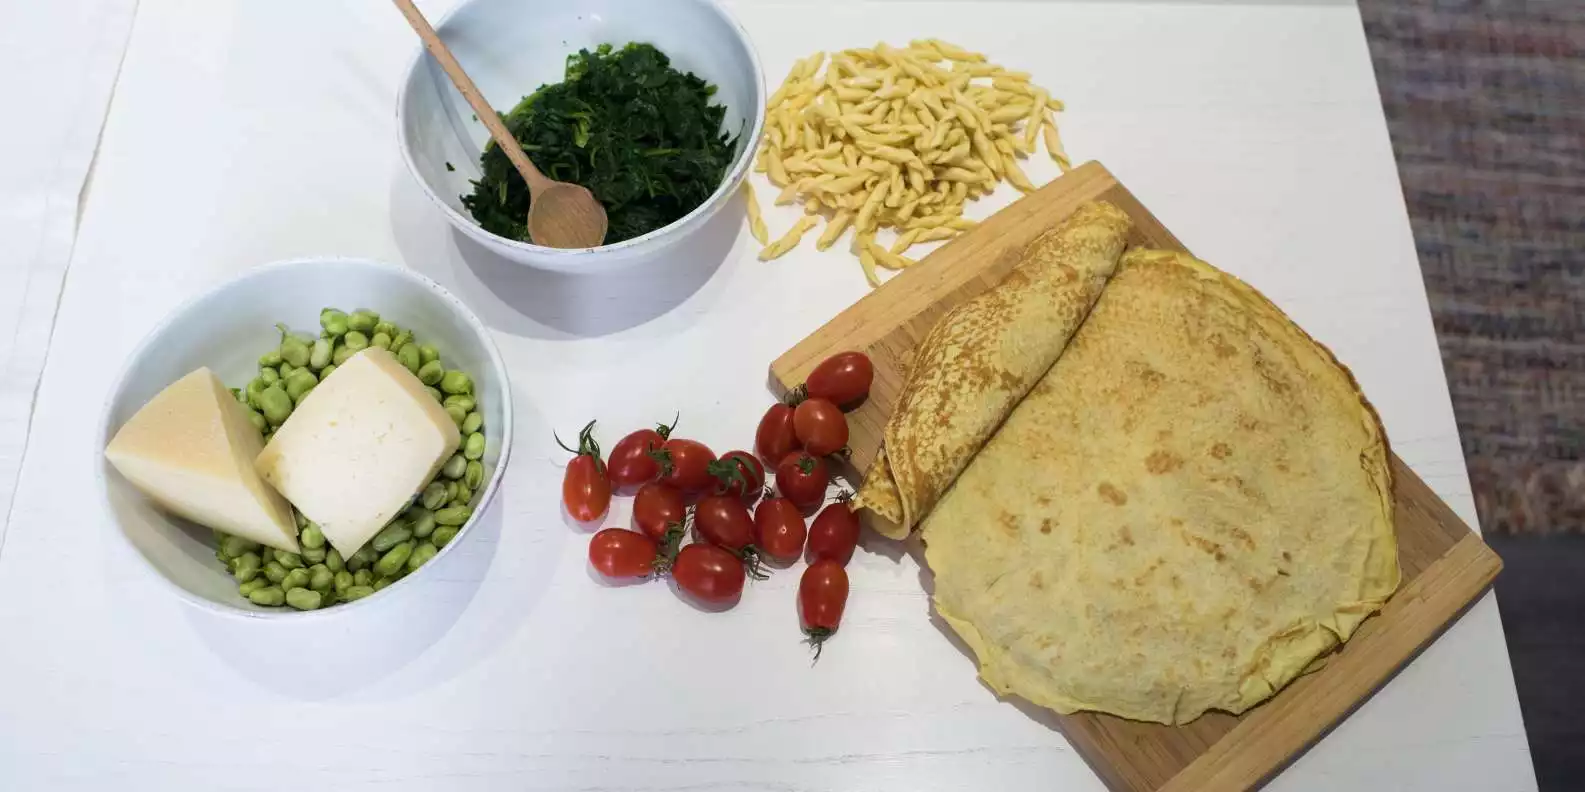 Genoa Private Home Cooking Class | GetYourGuide